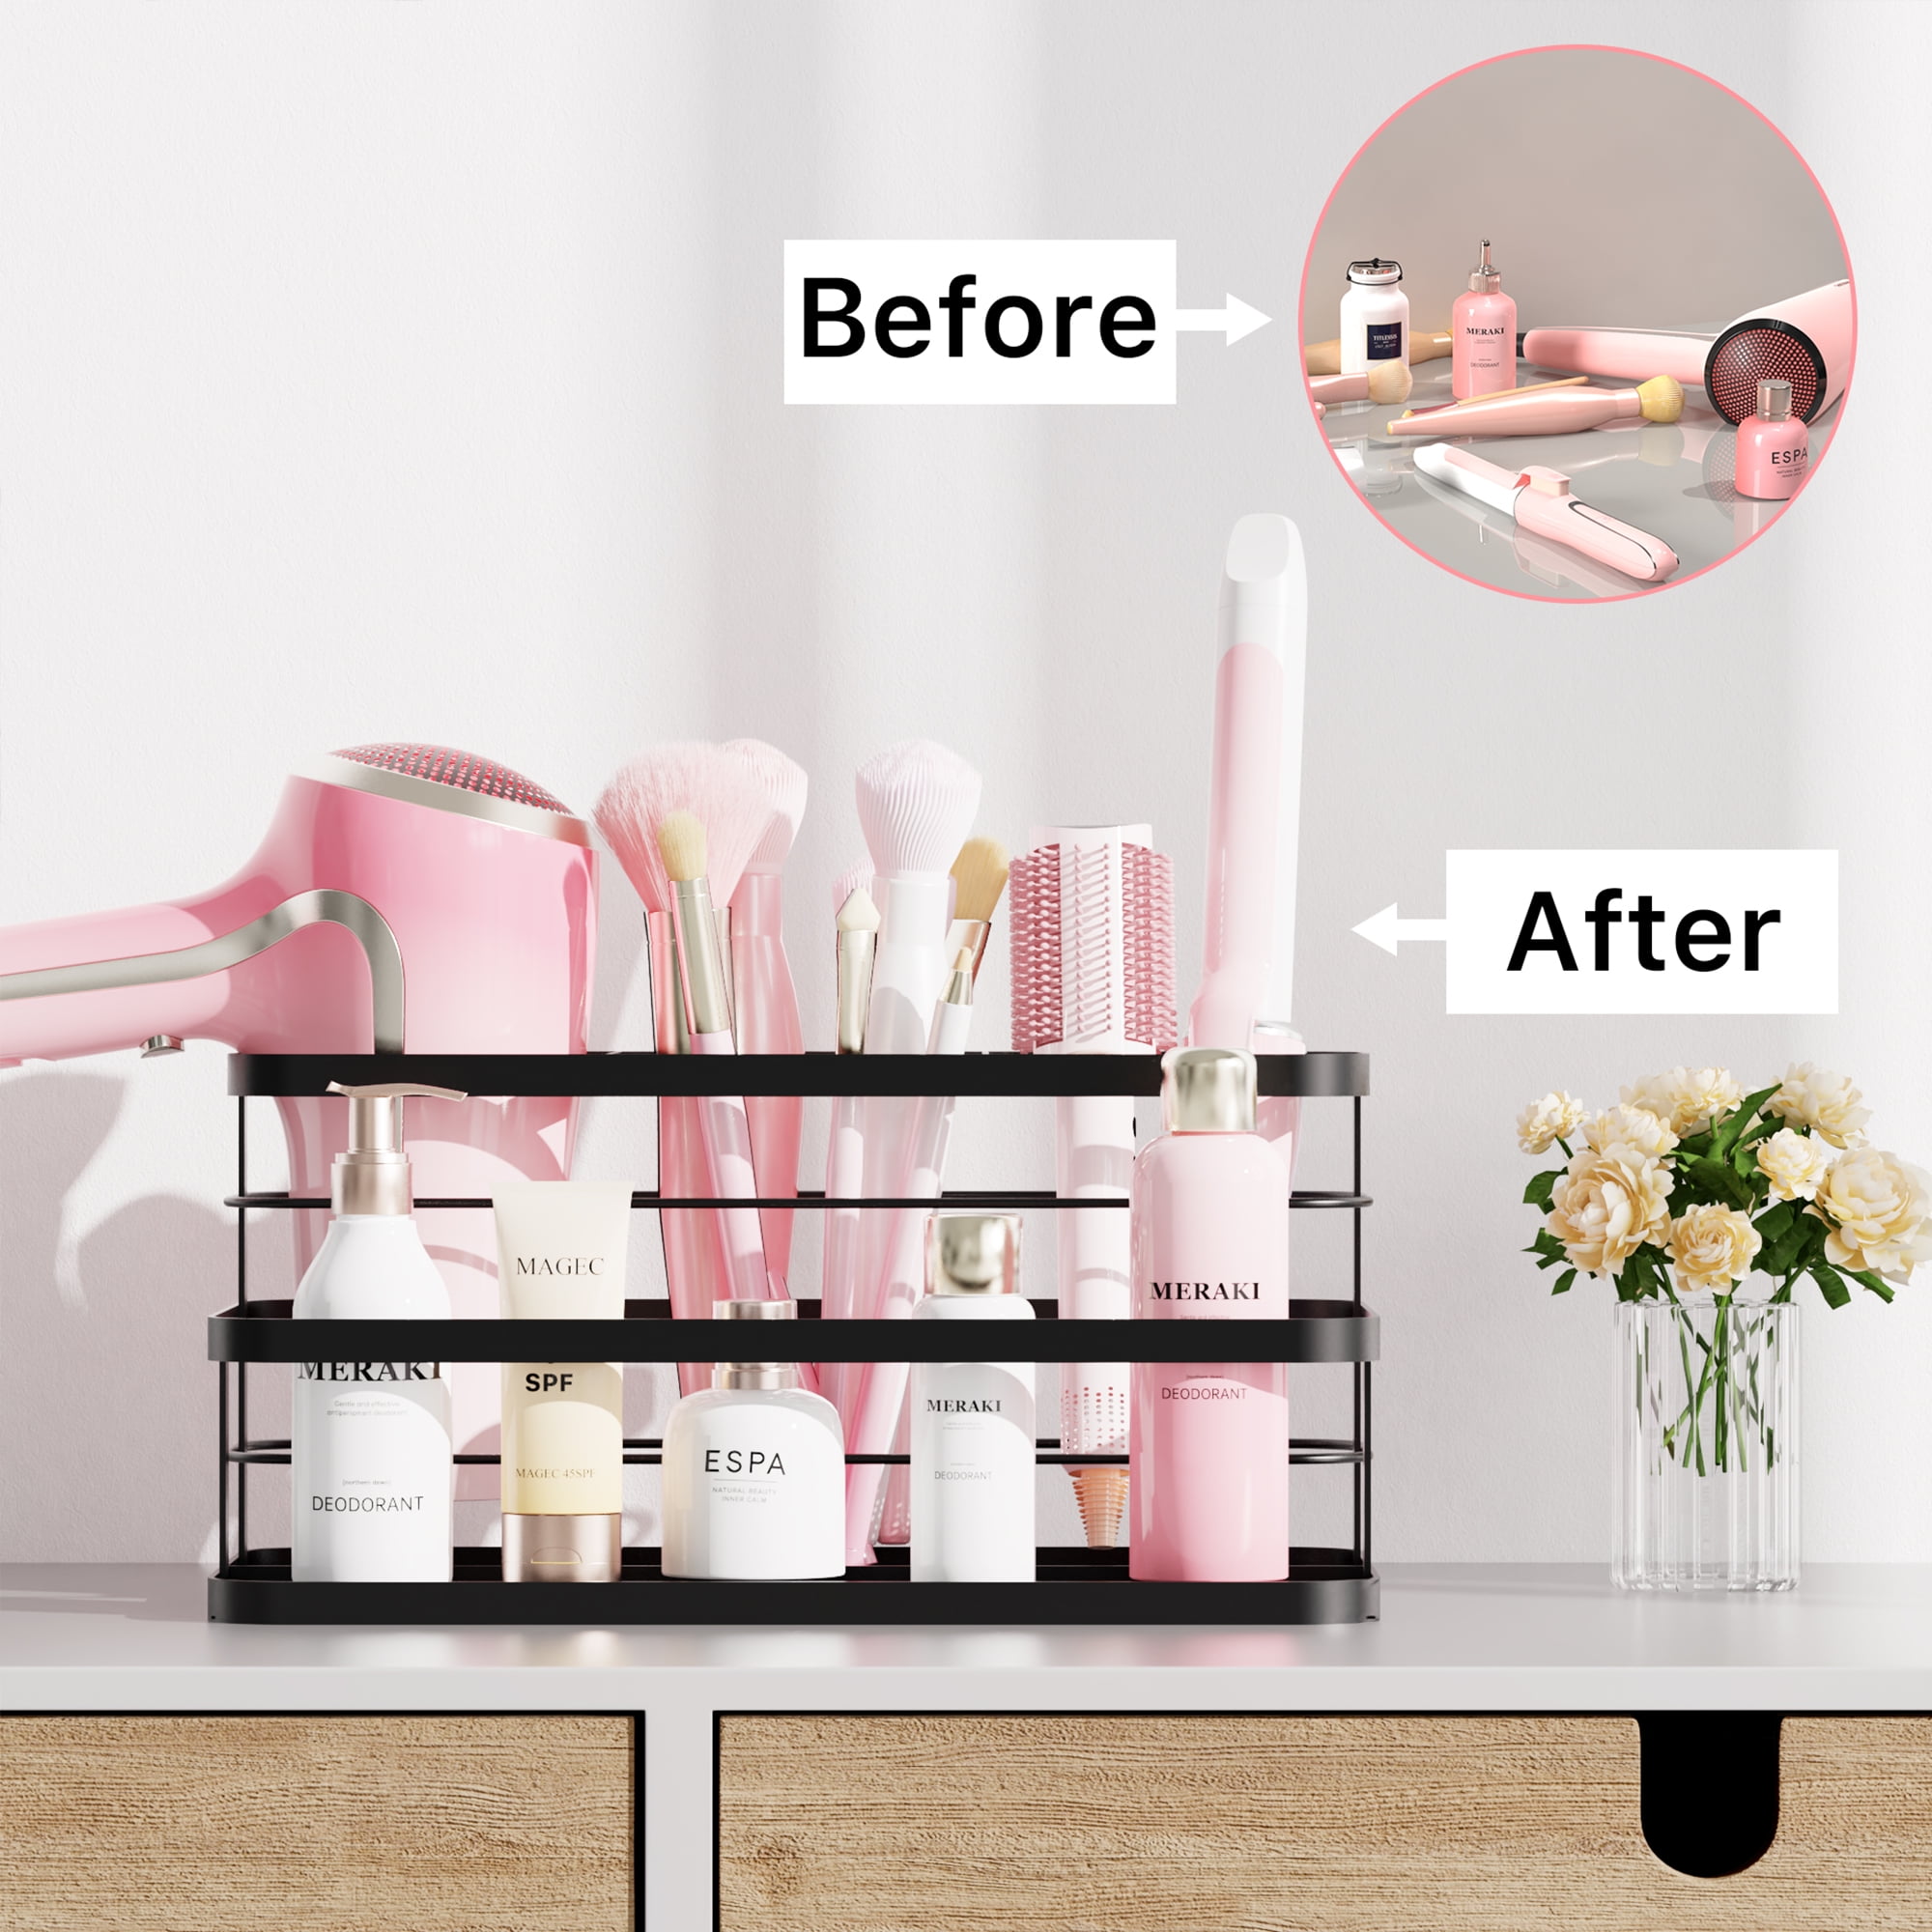 DIY Makeup Brush Drying Rack – Easy How-To – StyleCaster